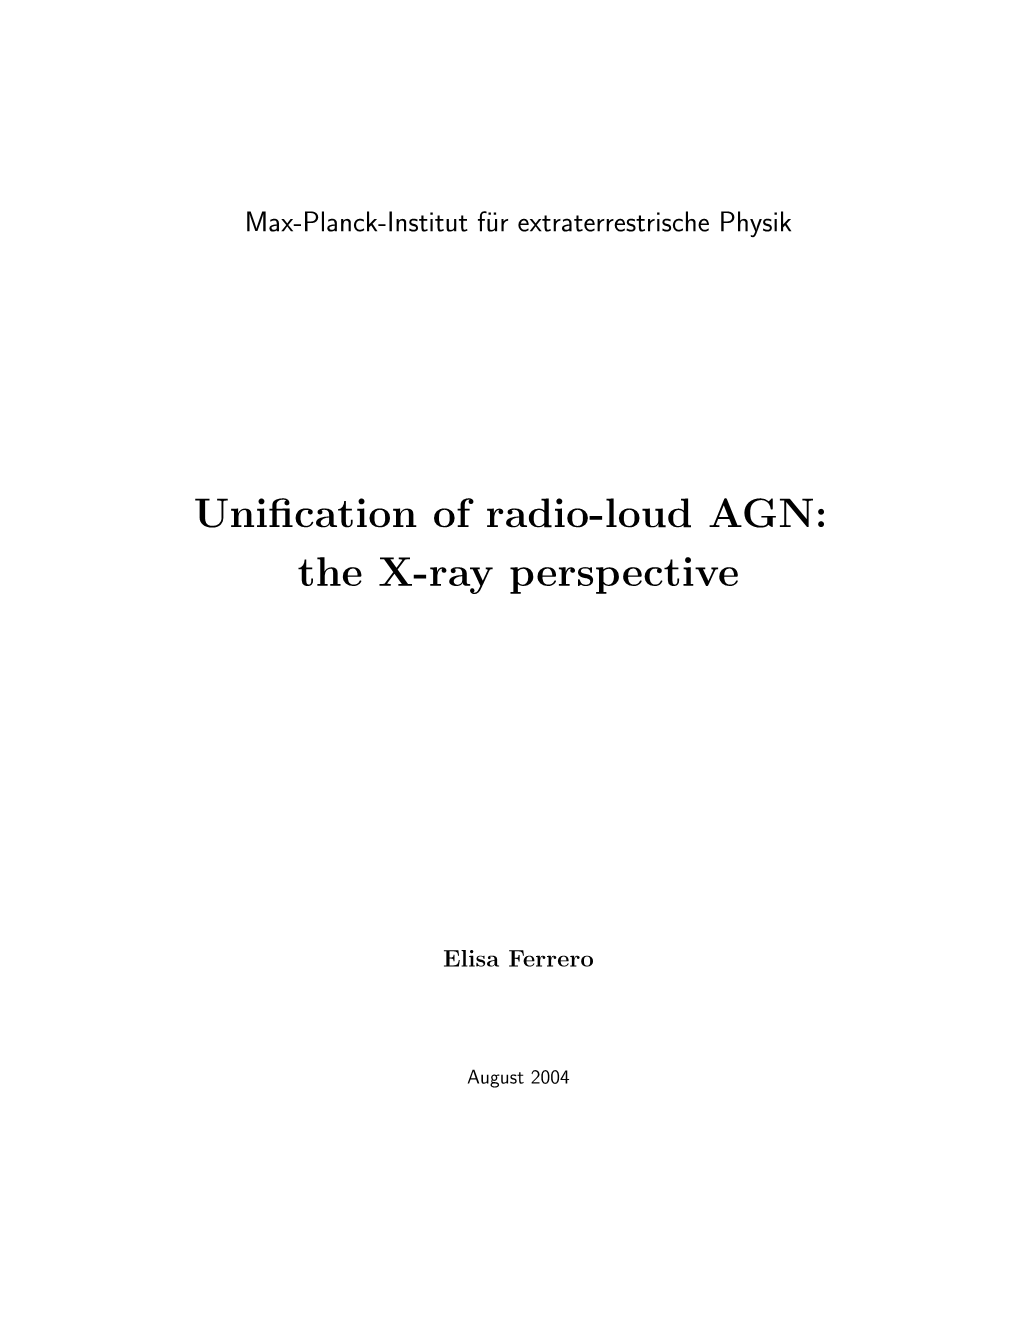 Unification of Radio-Loud AGN: the X-Ray Perspective